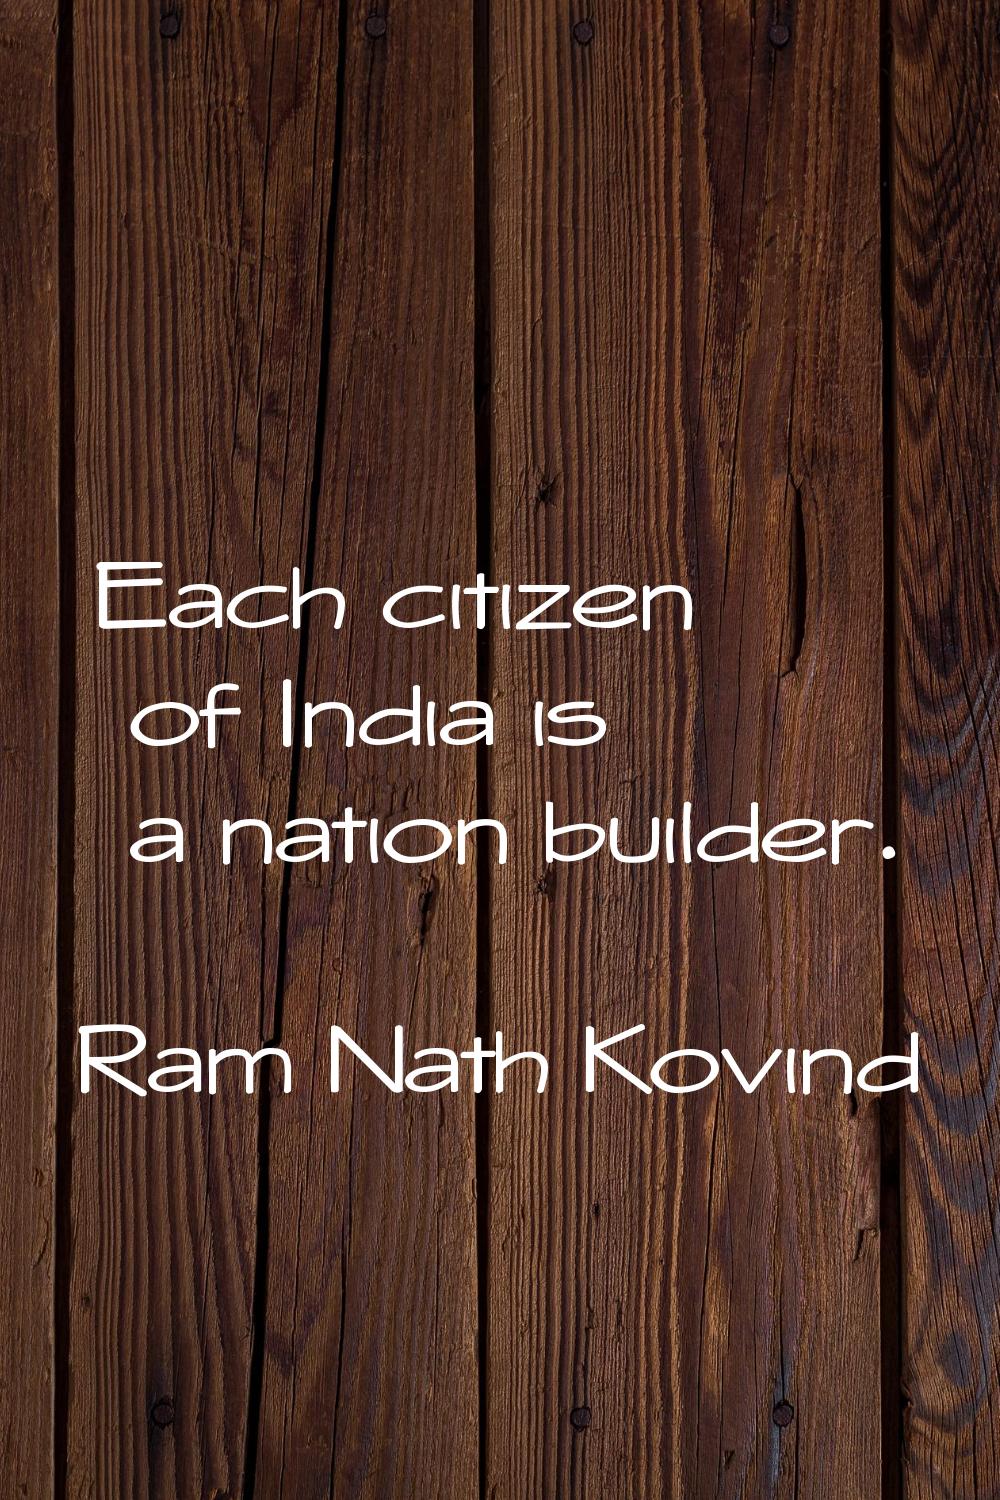 Each citizen of India is a nation builder.